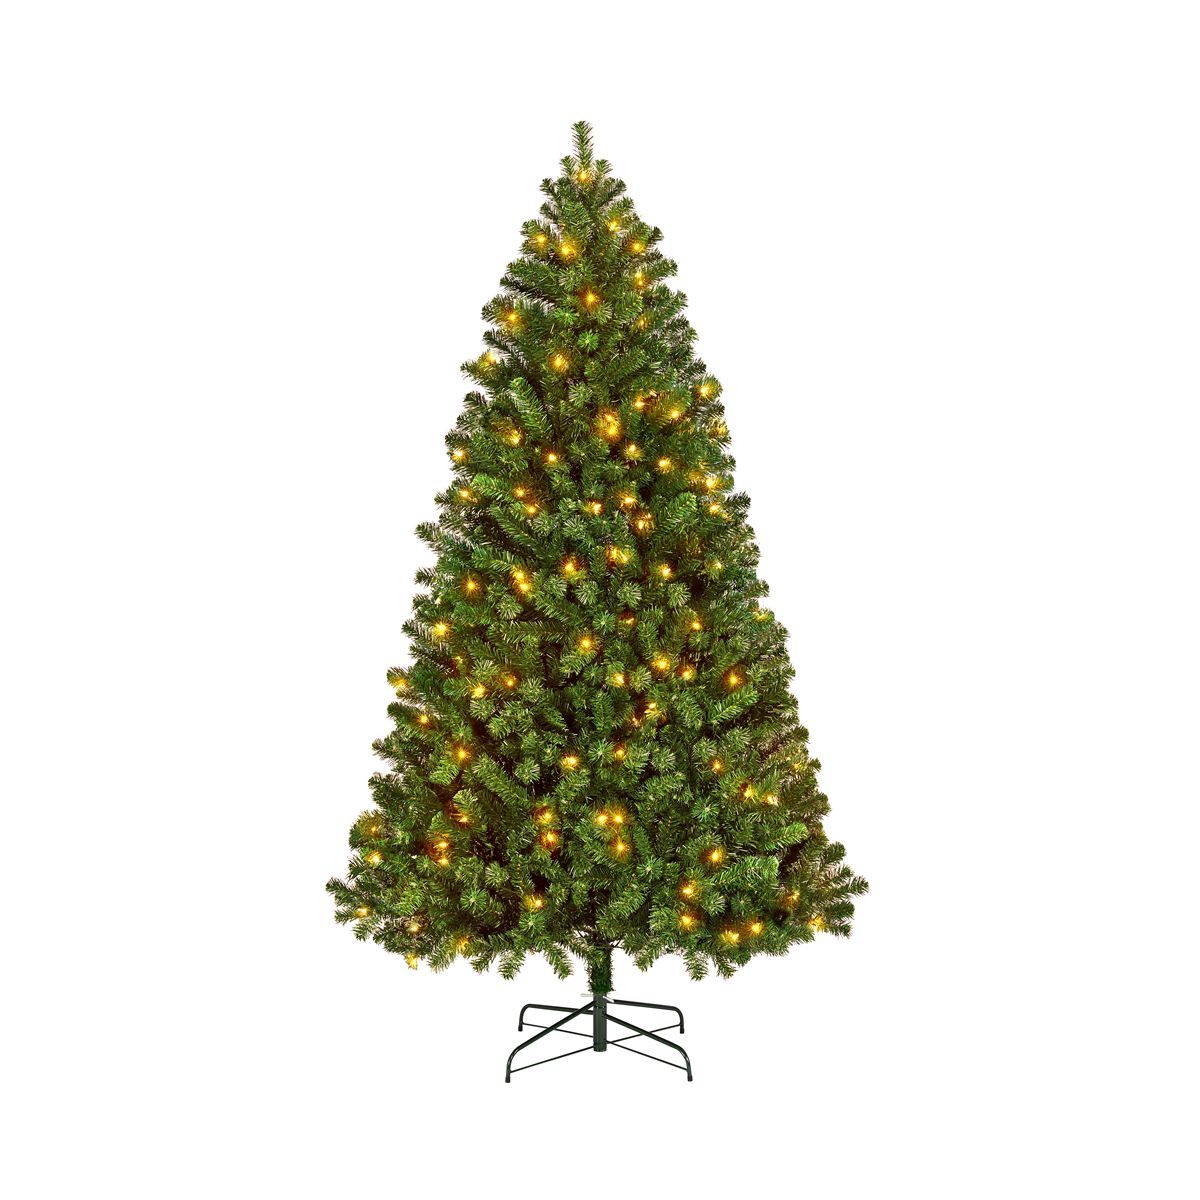 Yaheetech Pre-lit Spruce Artificial Christmas Tree with 150 Incandescent Warm White Lights | Target